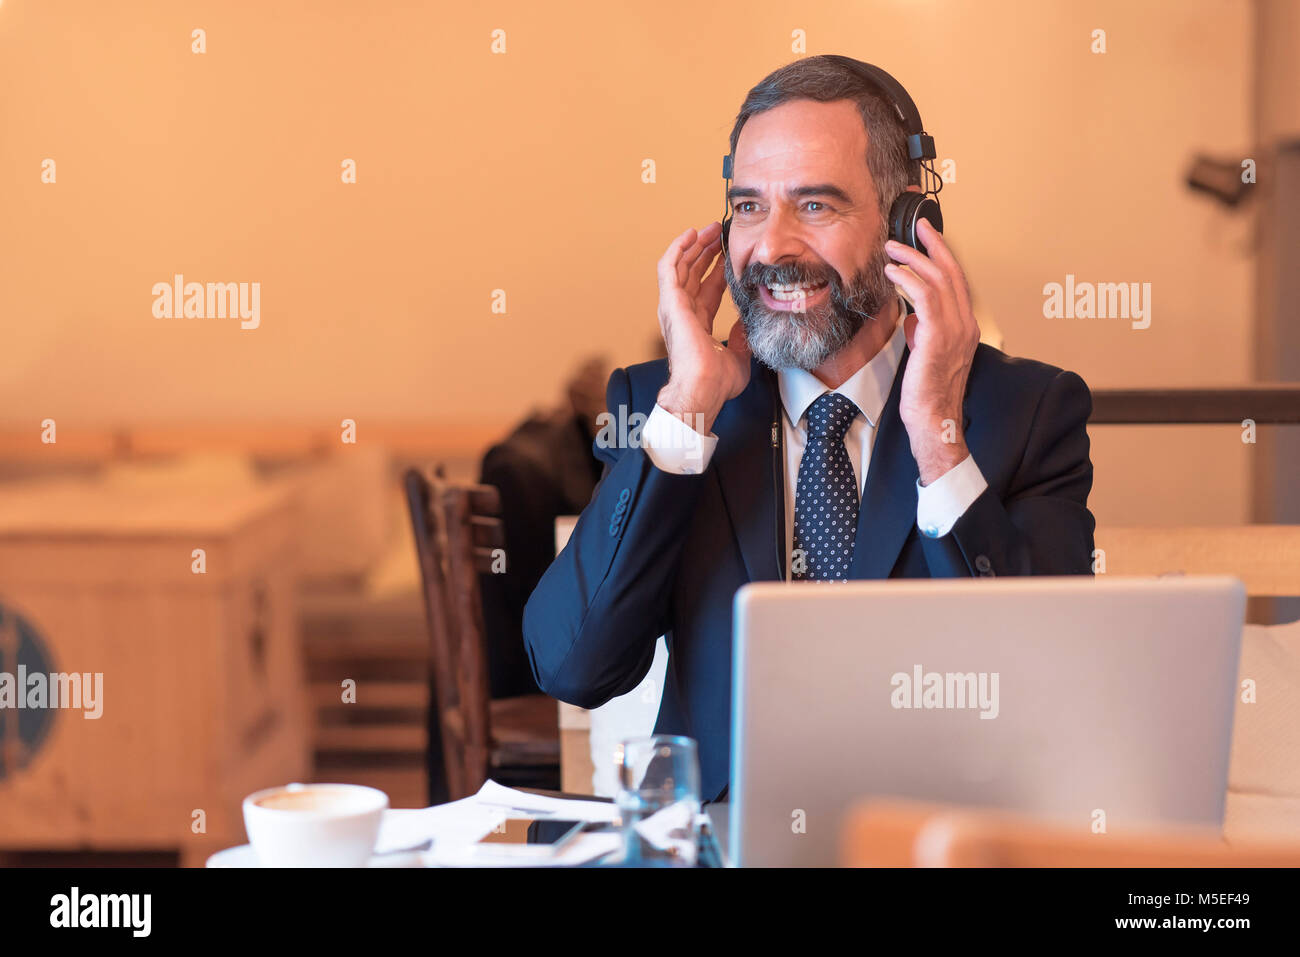 Senior old business man listening to his favorite music through a pair of big headphones in a coffee shop Stock Photo